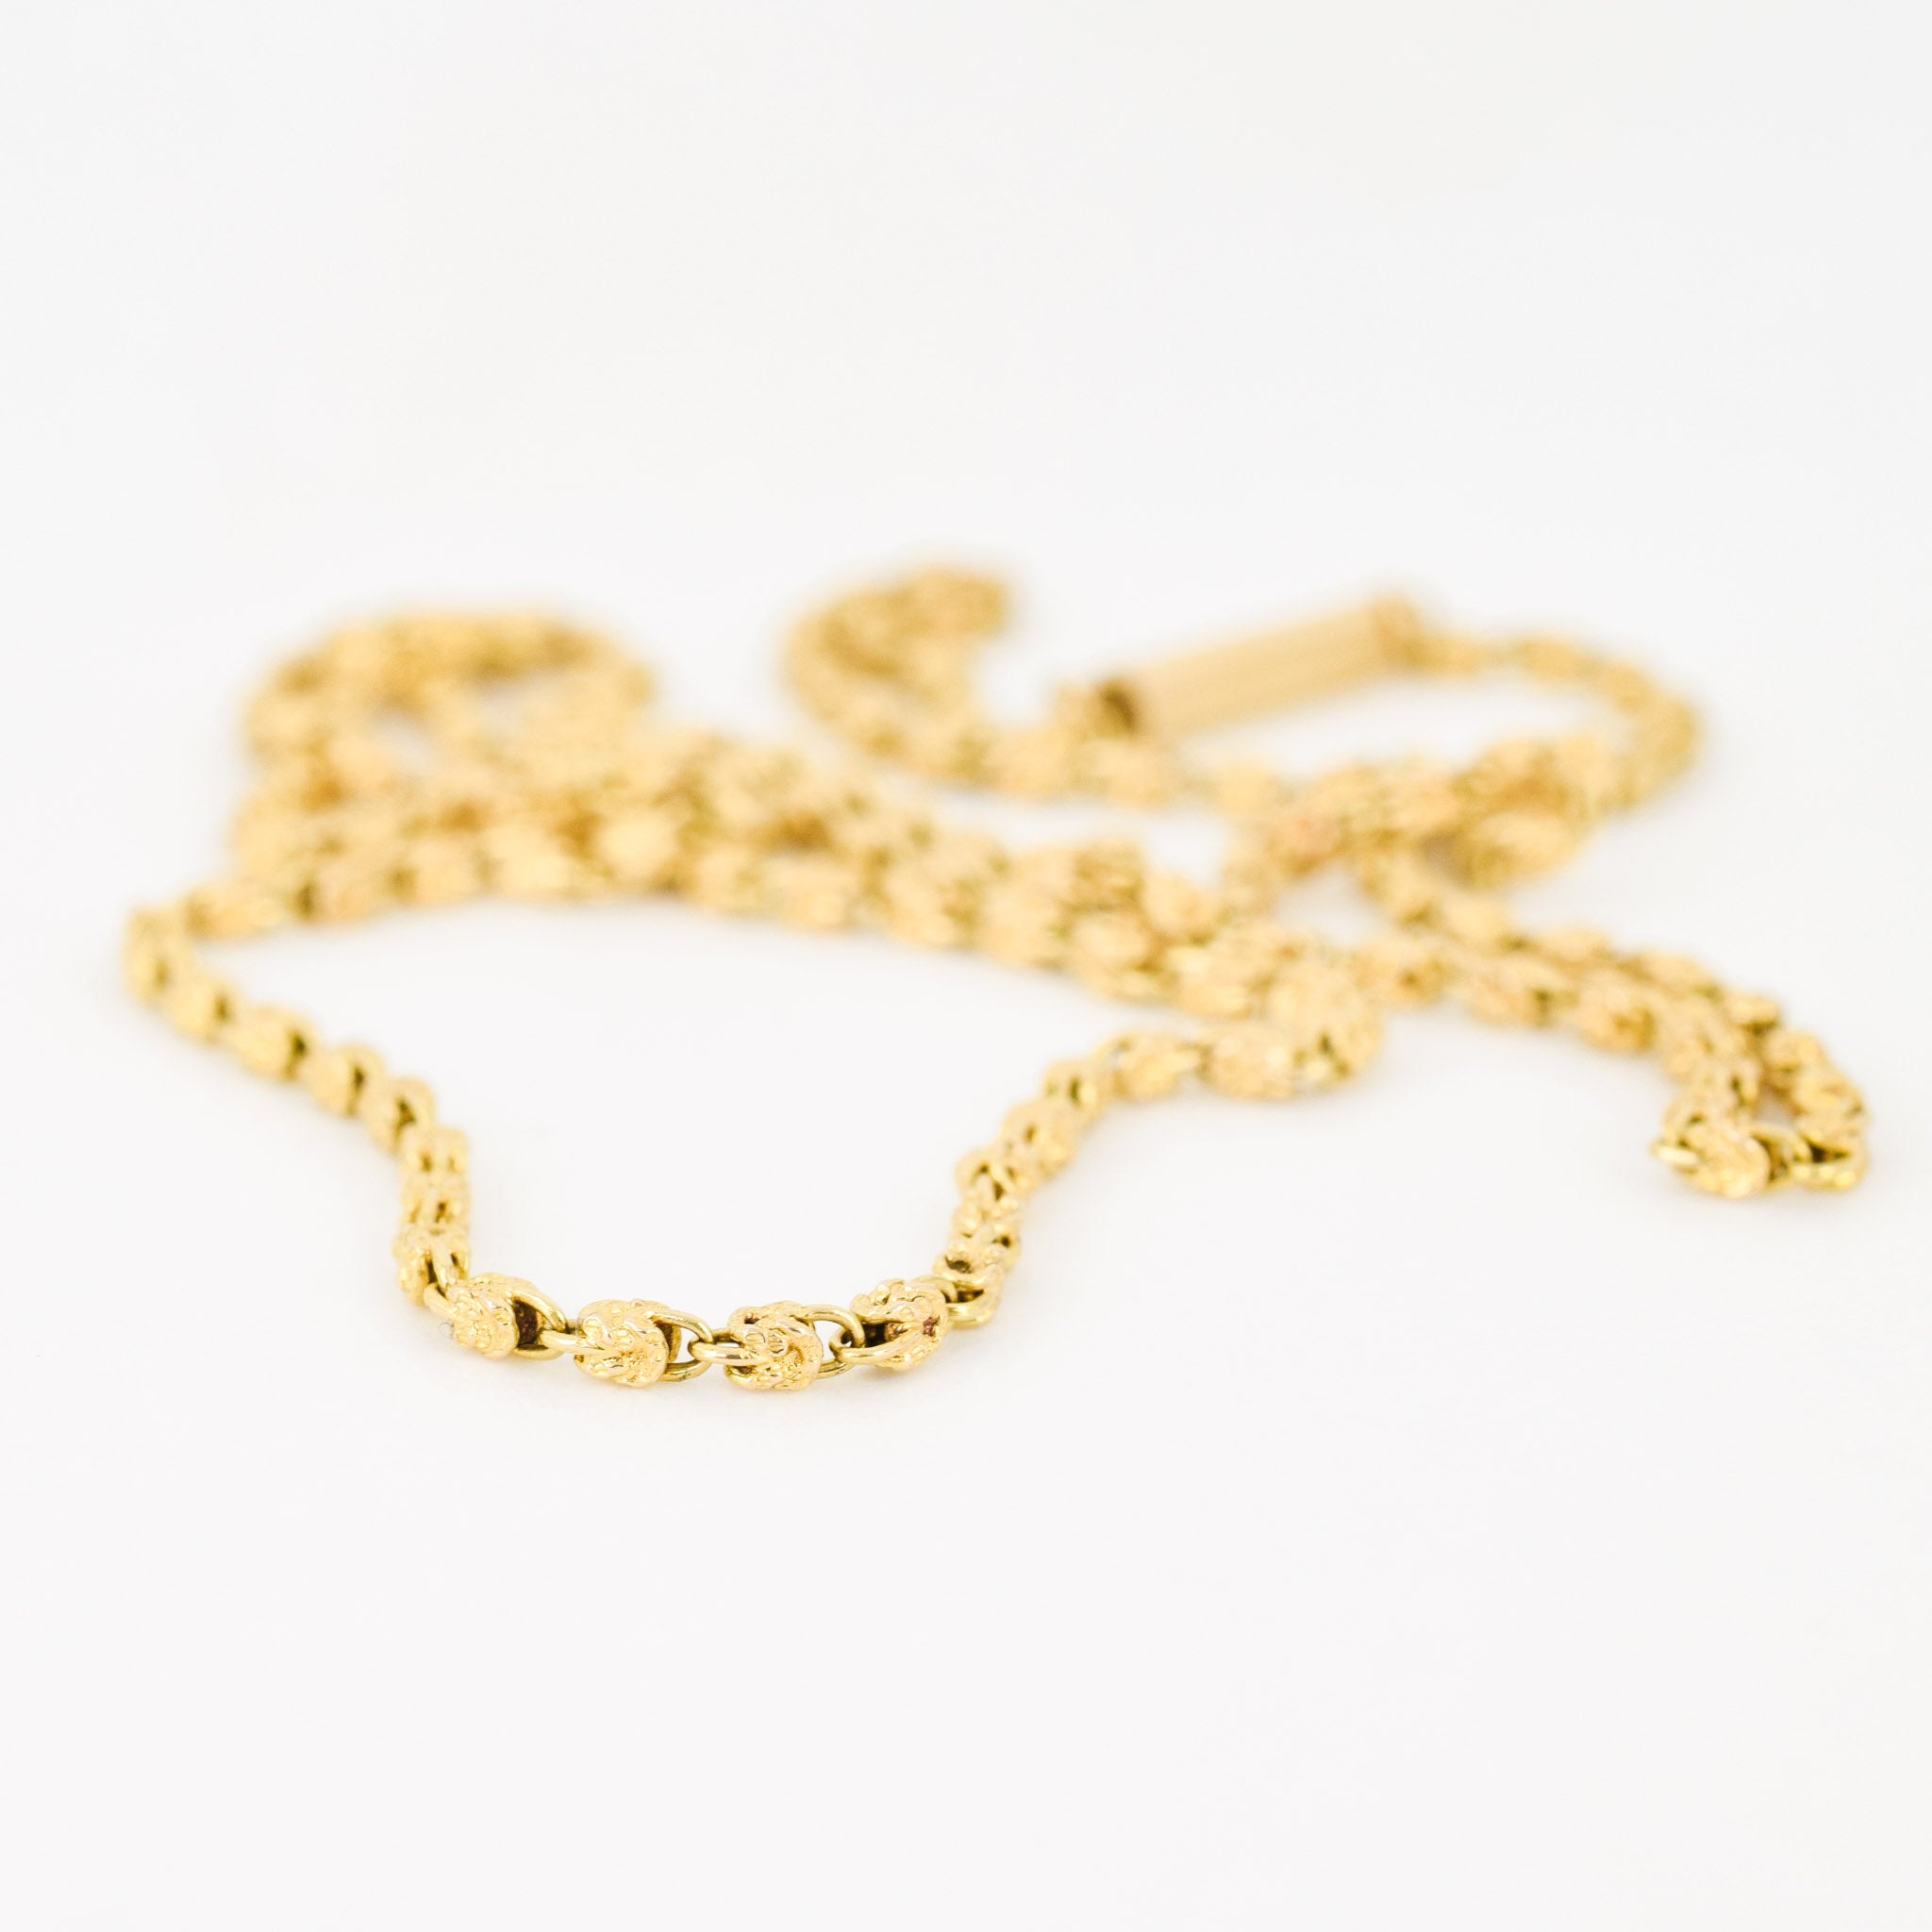 vintage gold nugget chain necklace, folklor vintage jewelry canada